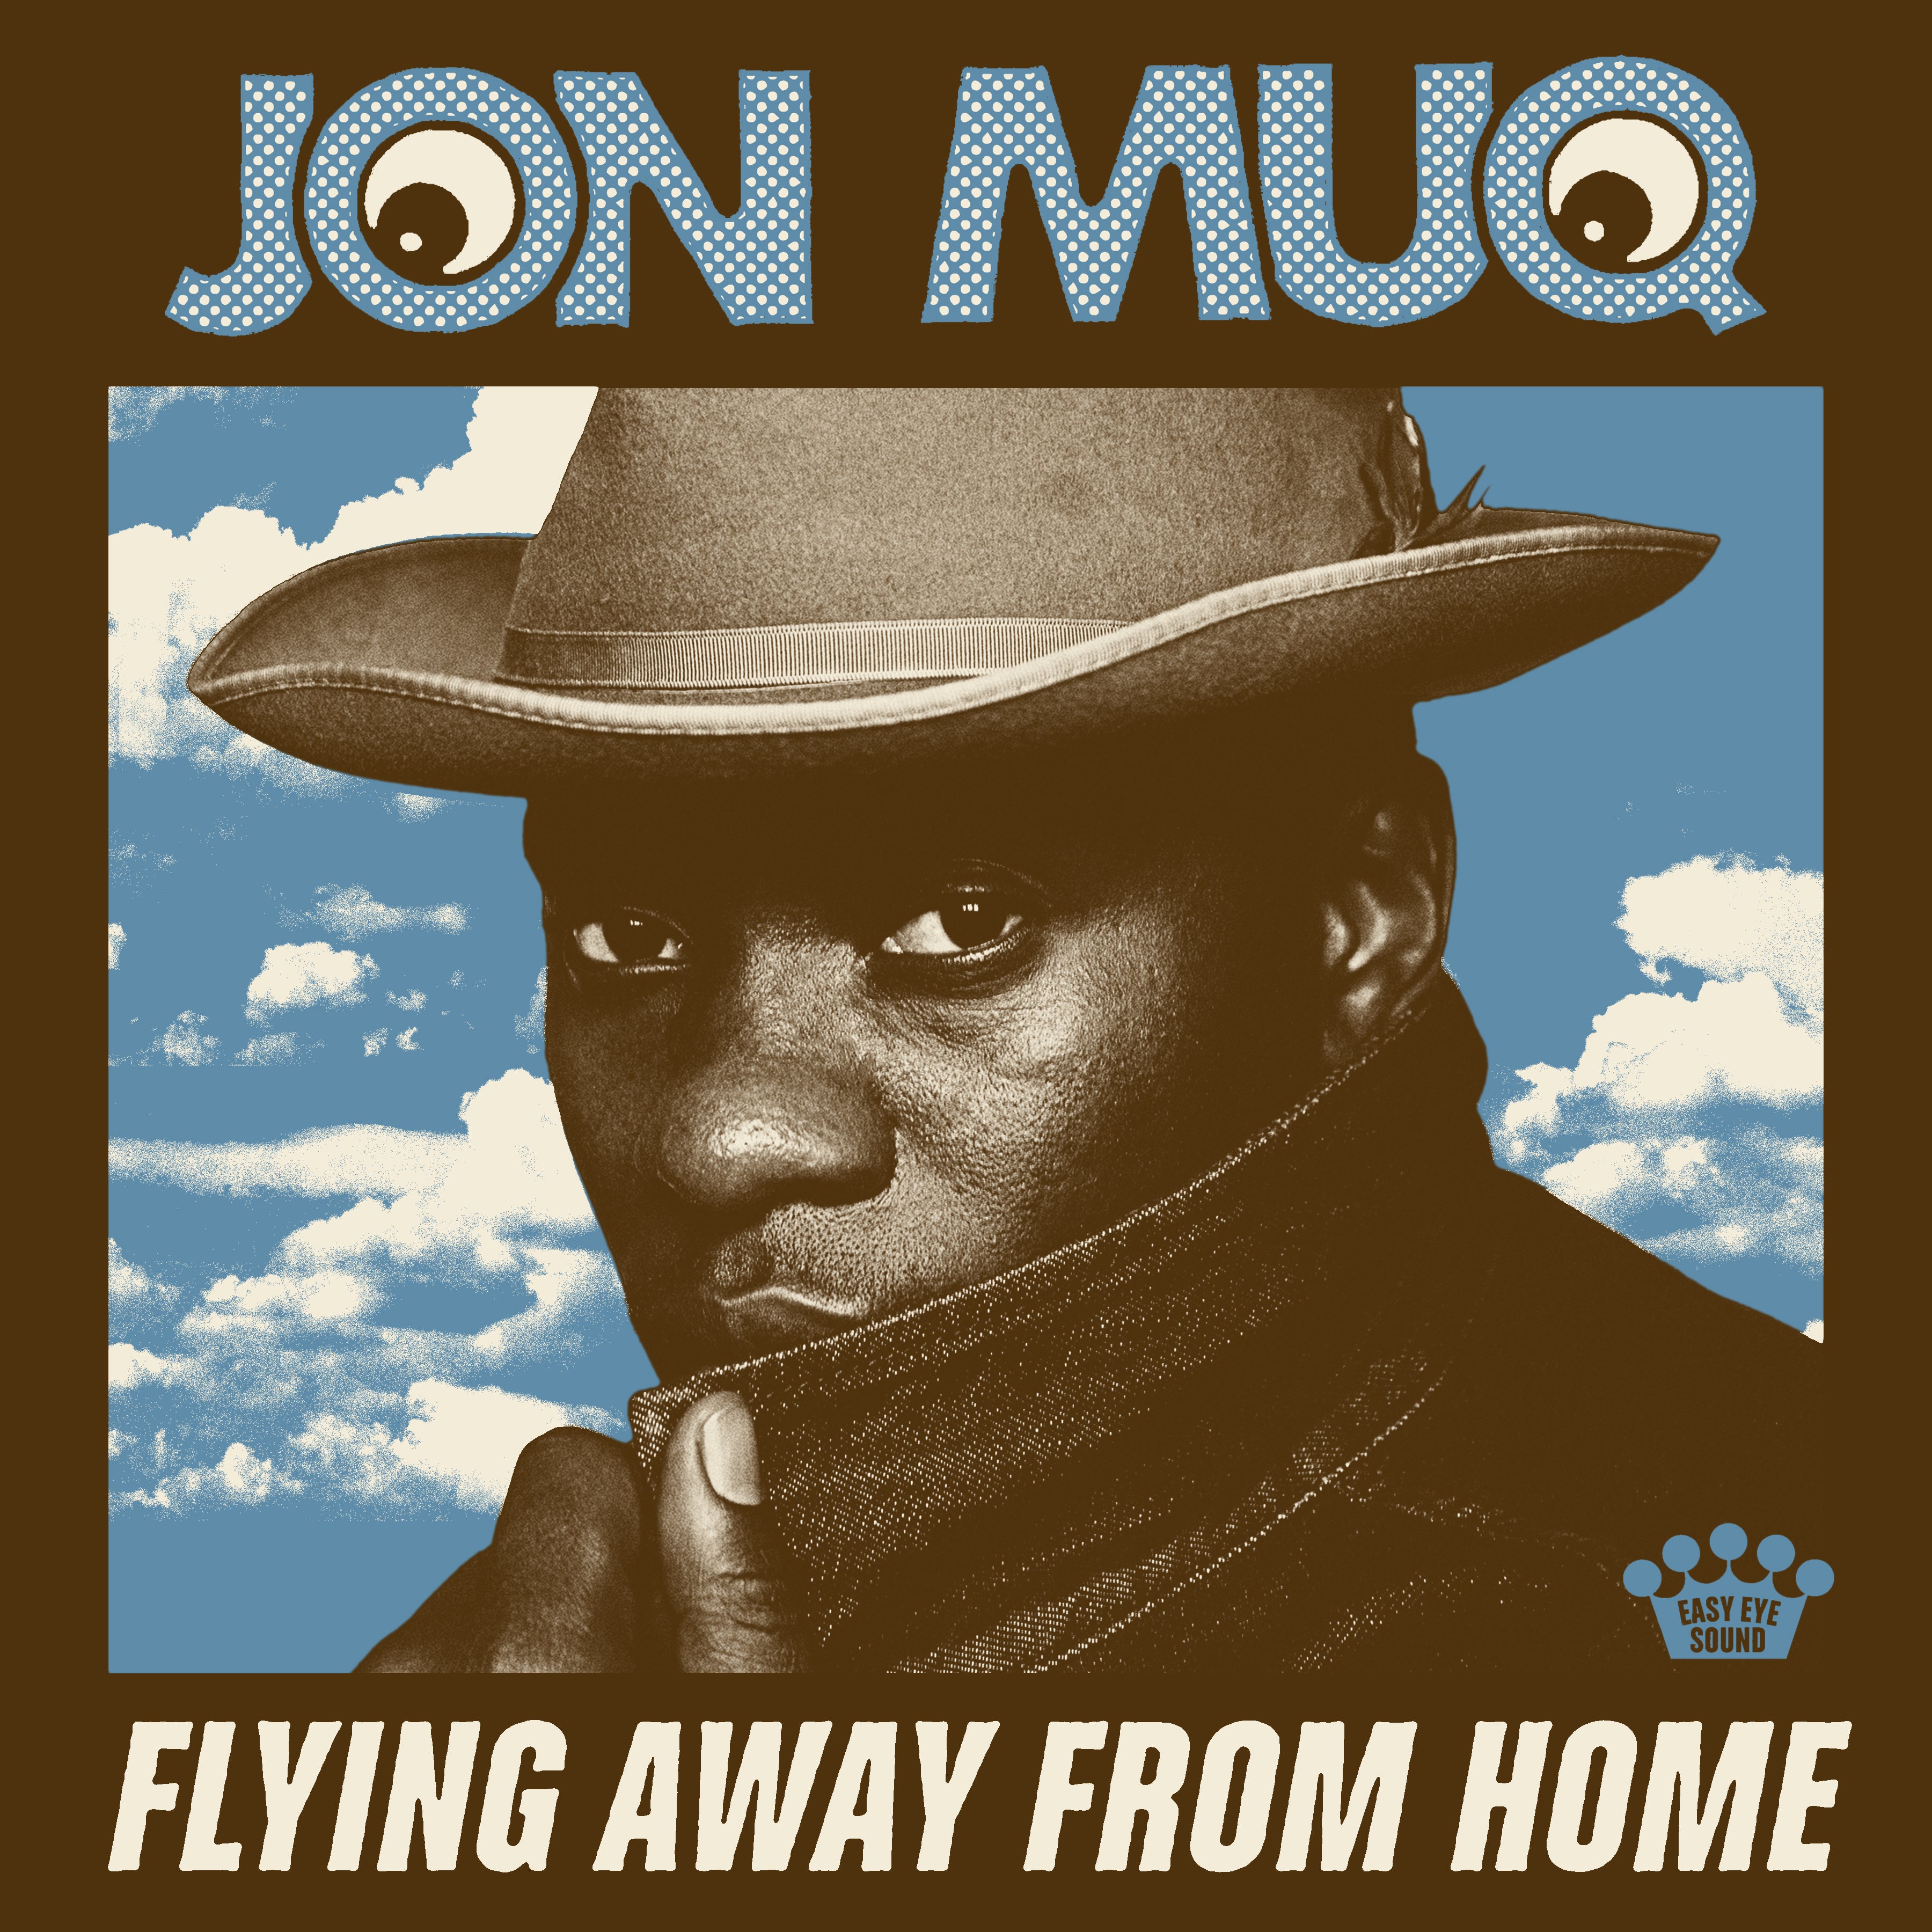 Jon Muq's stunning new single "Flying Away From Home" is available now!